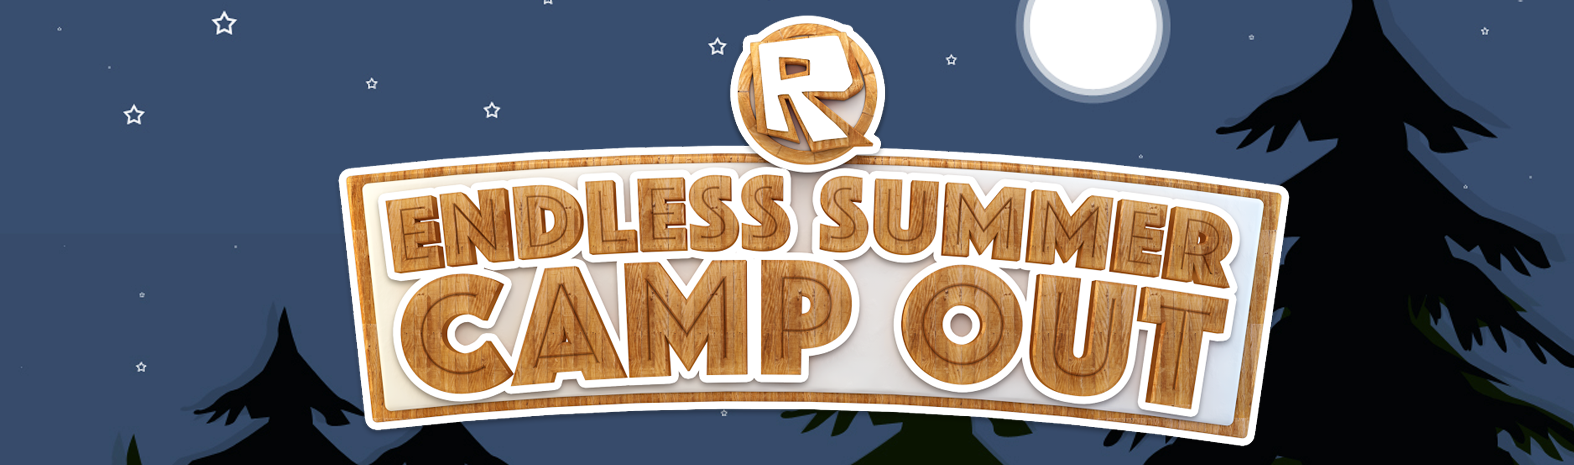 Announcing The Endless Summer Camp Out All Night - 